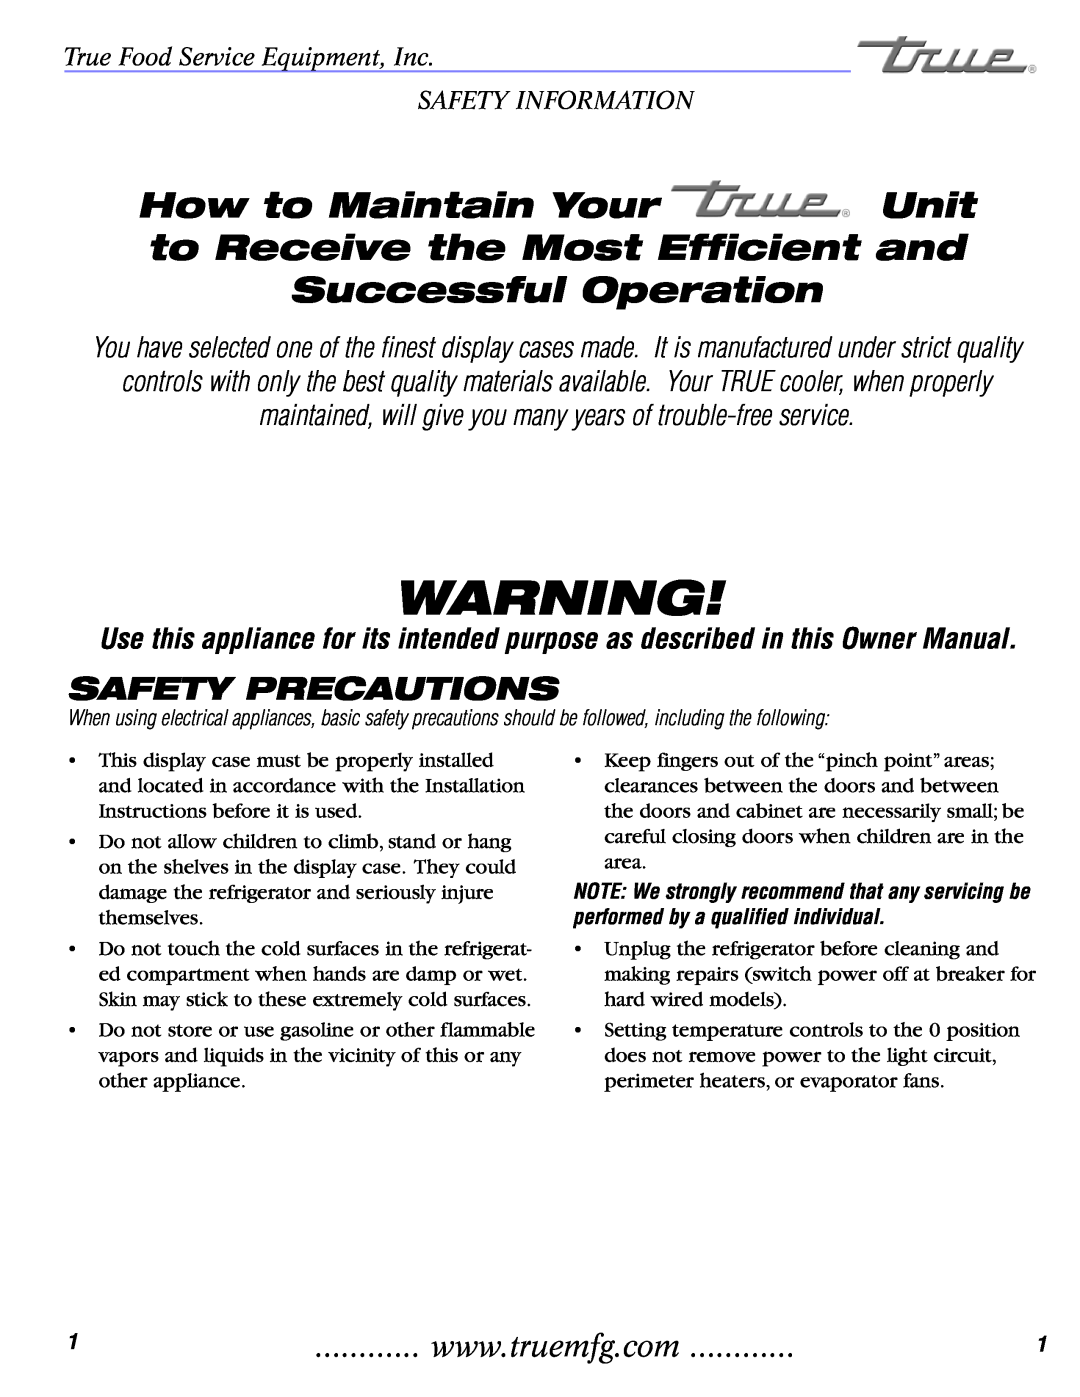 True Manufacturing Company TCGDZ-50 Safety Precautions, True Food Service Equipment, Inc SAFETY INFORMATION 